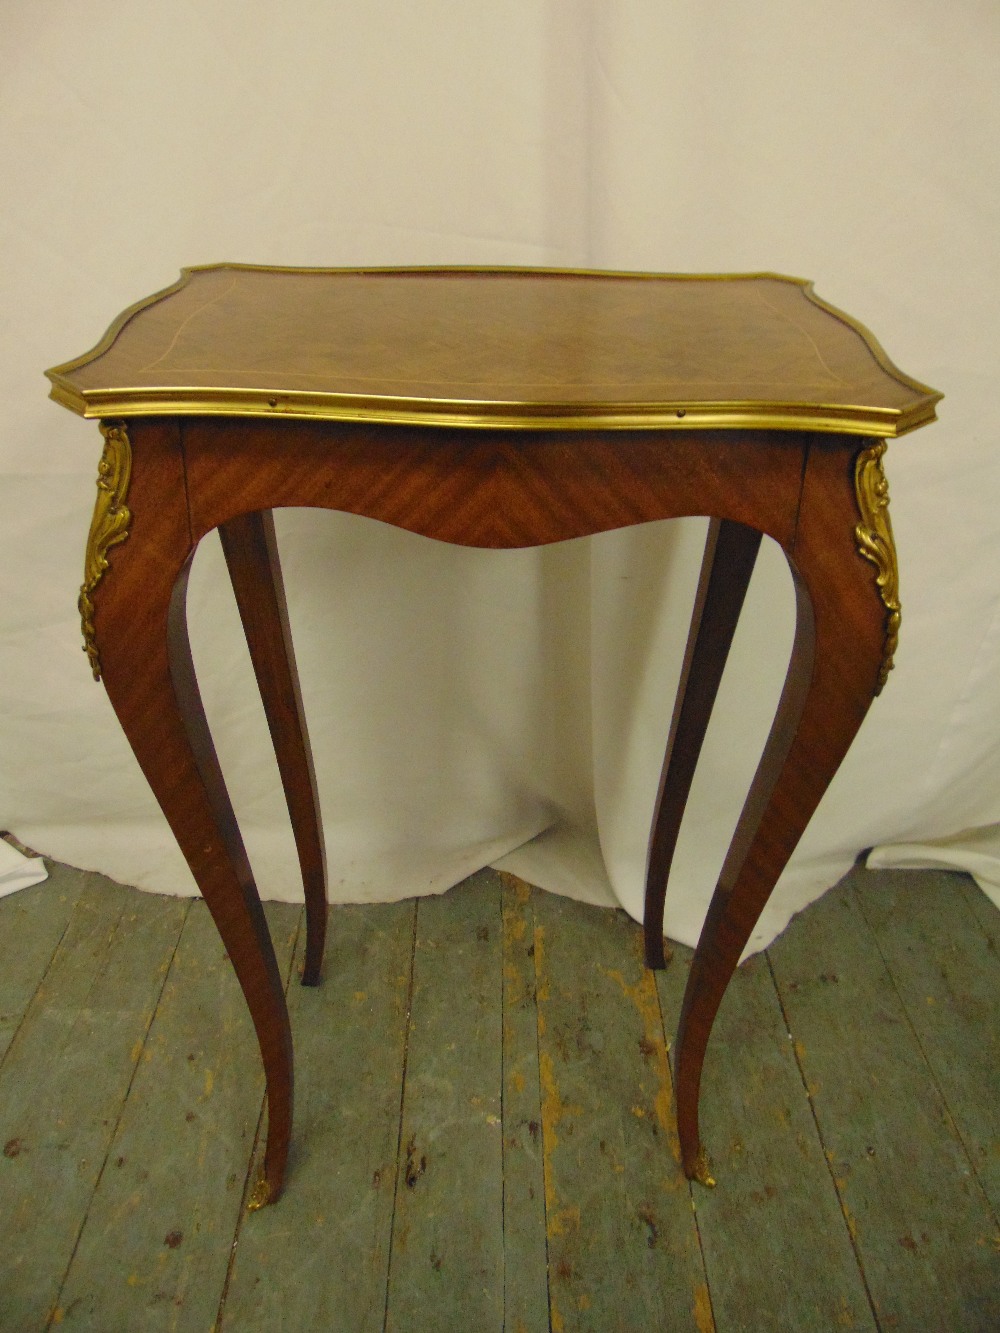 A rectangular Kingswood side table with applied gilded metal mounts on four cabriole legs